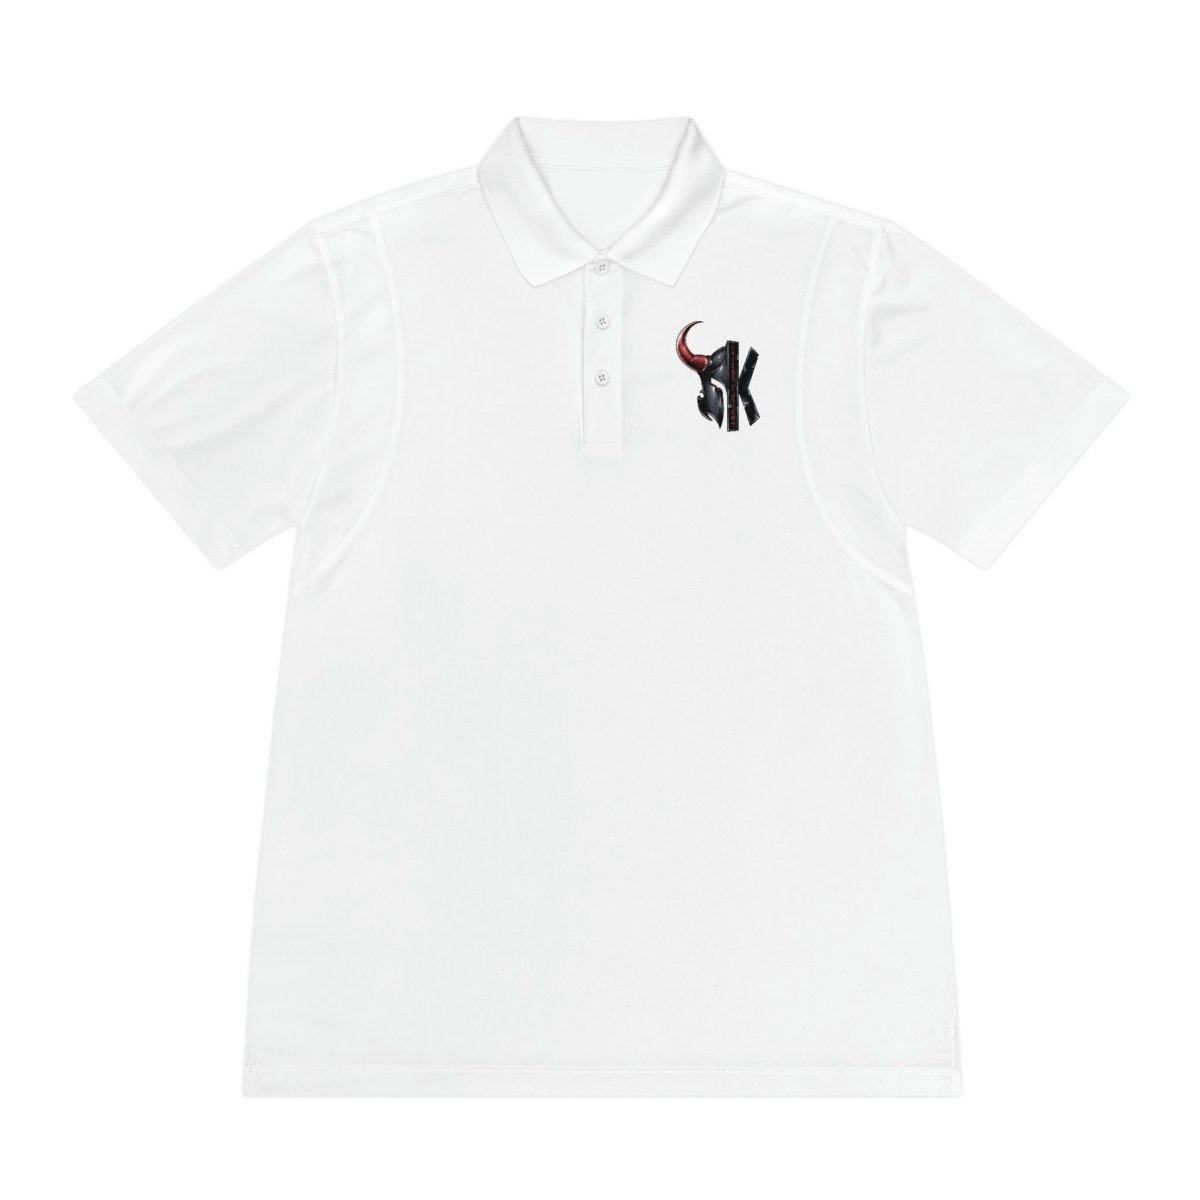 Men's Sport Polo Shirt - RockSolid Scales - White